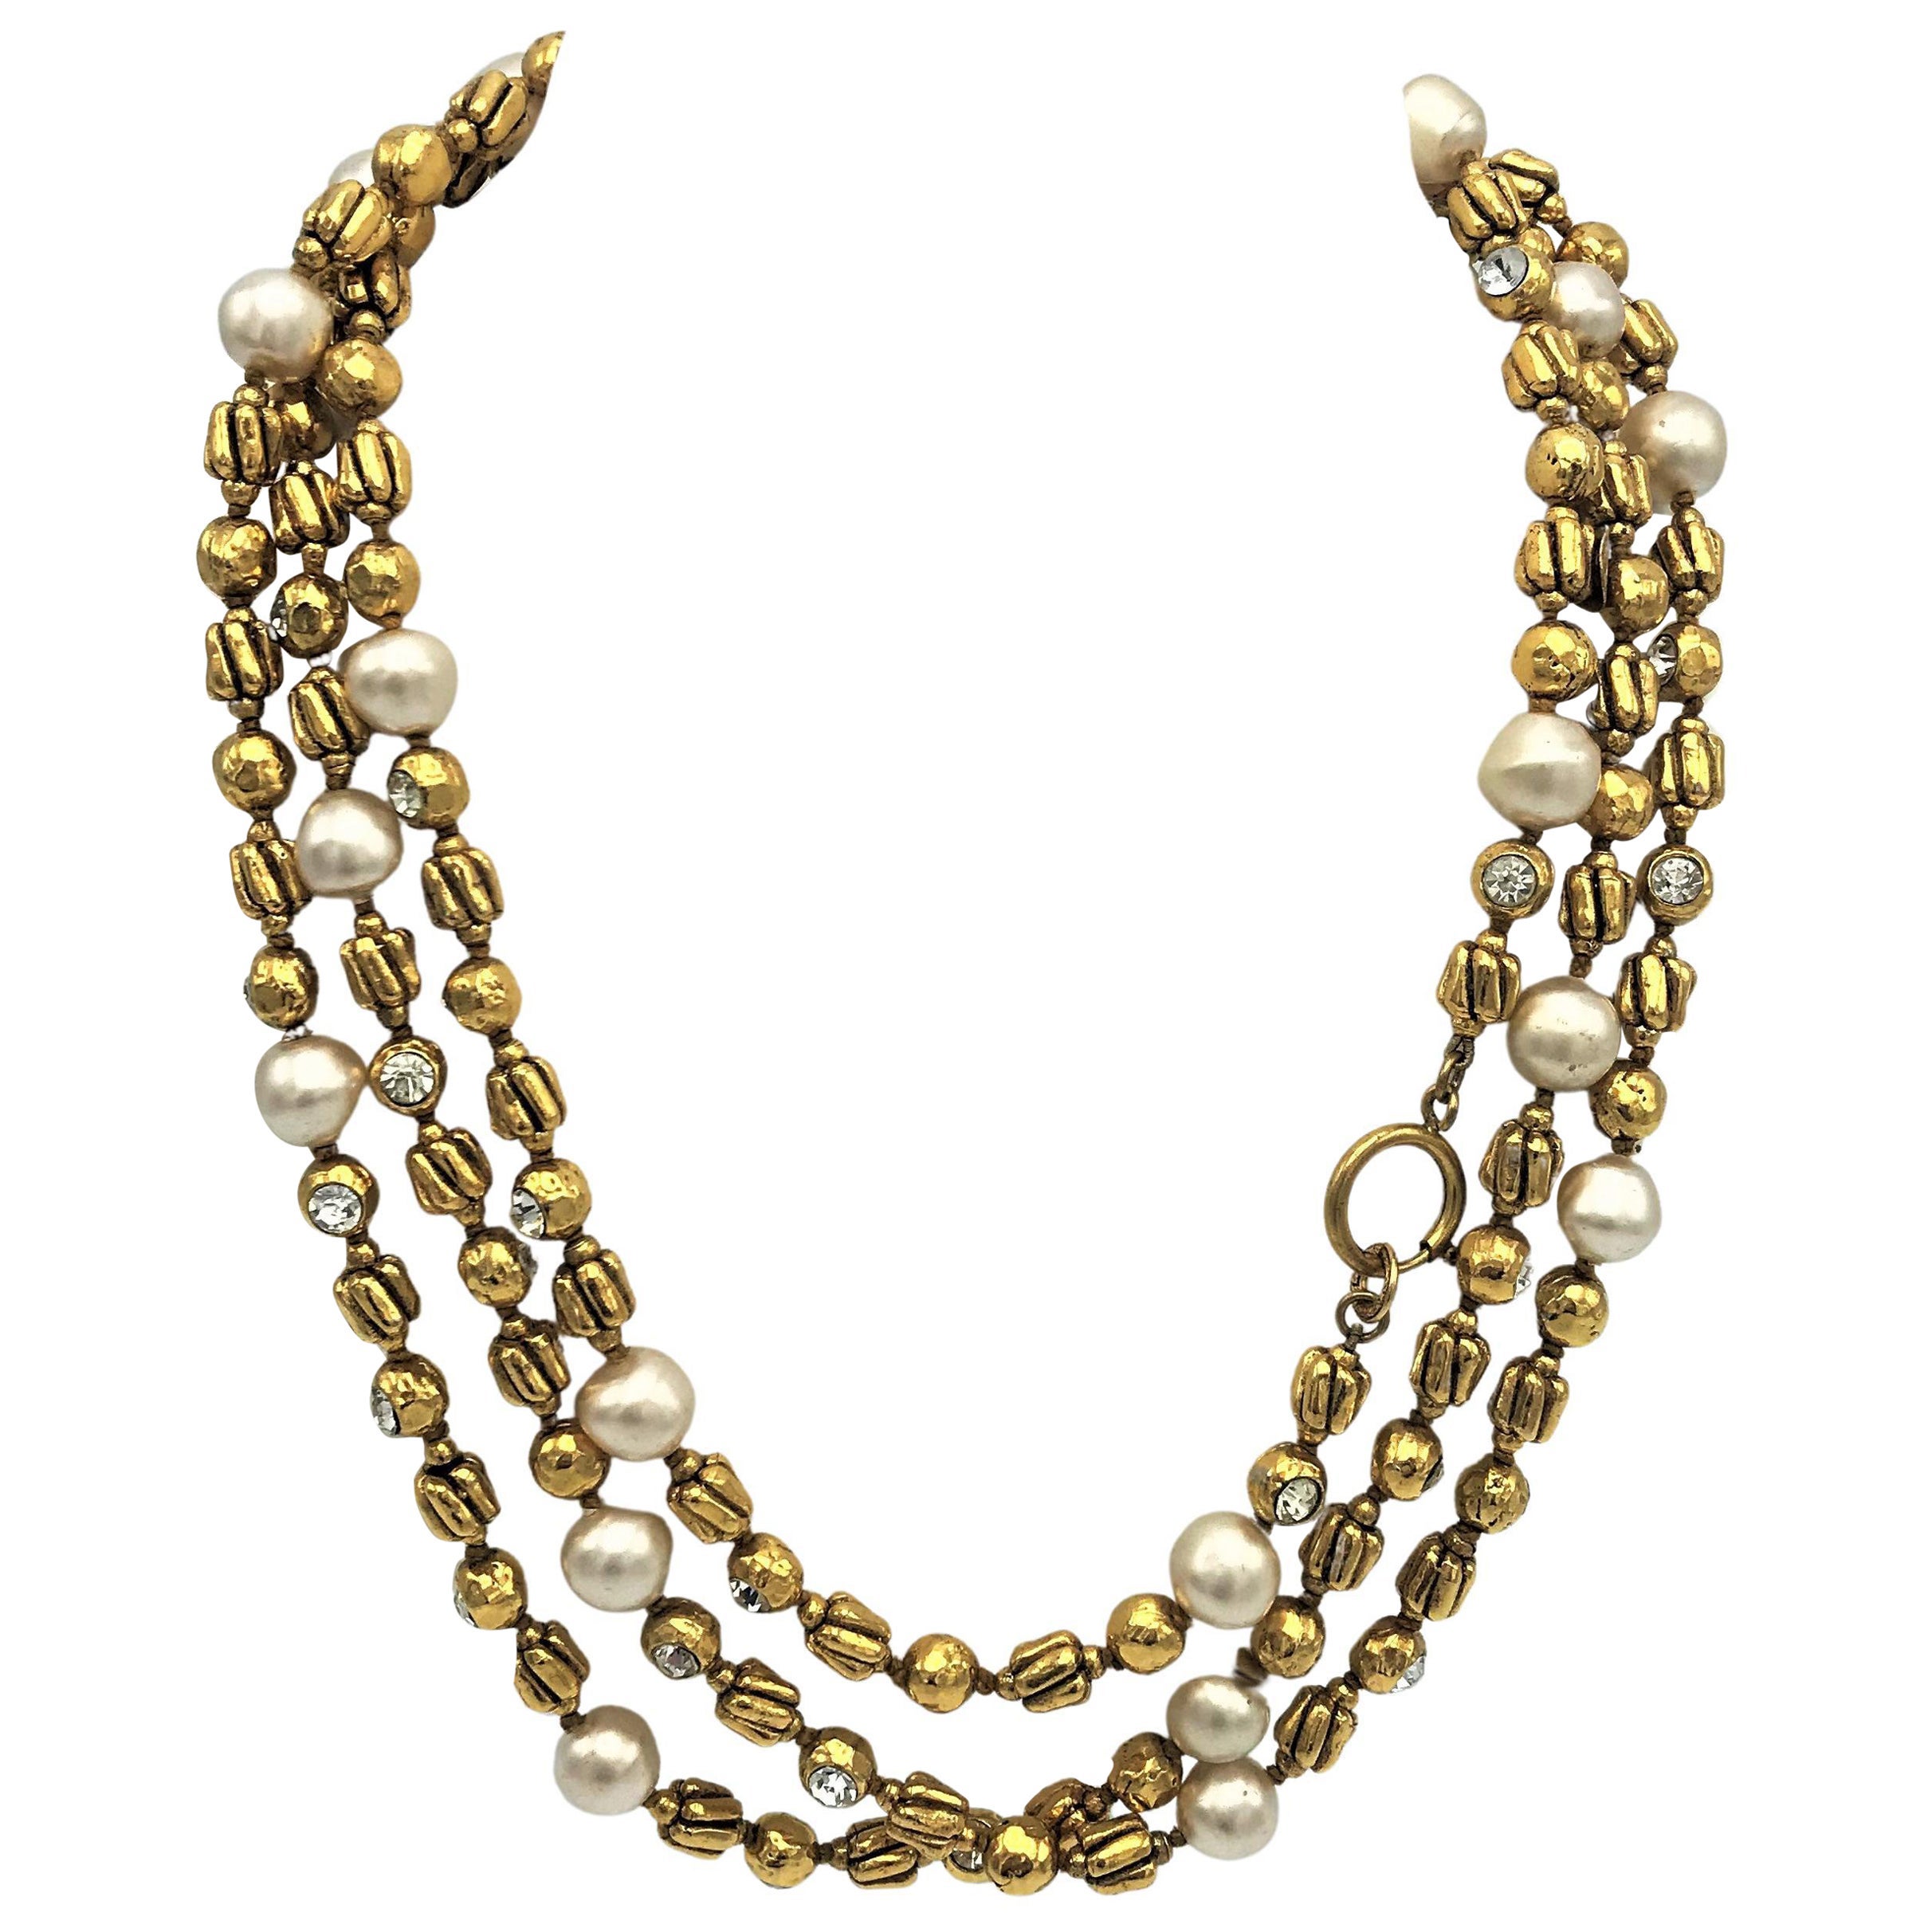 Chanel necklace by R. Goossens with pearls, 183 cm lang gold plated, 1970/80s  For Sale